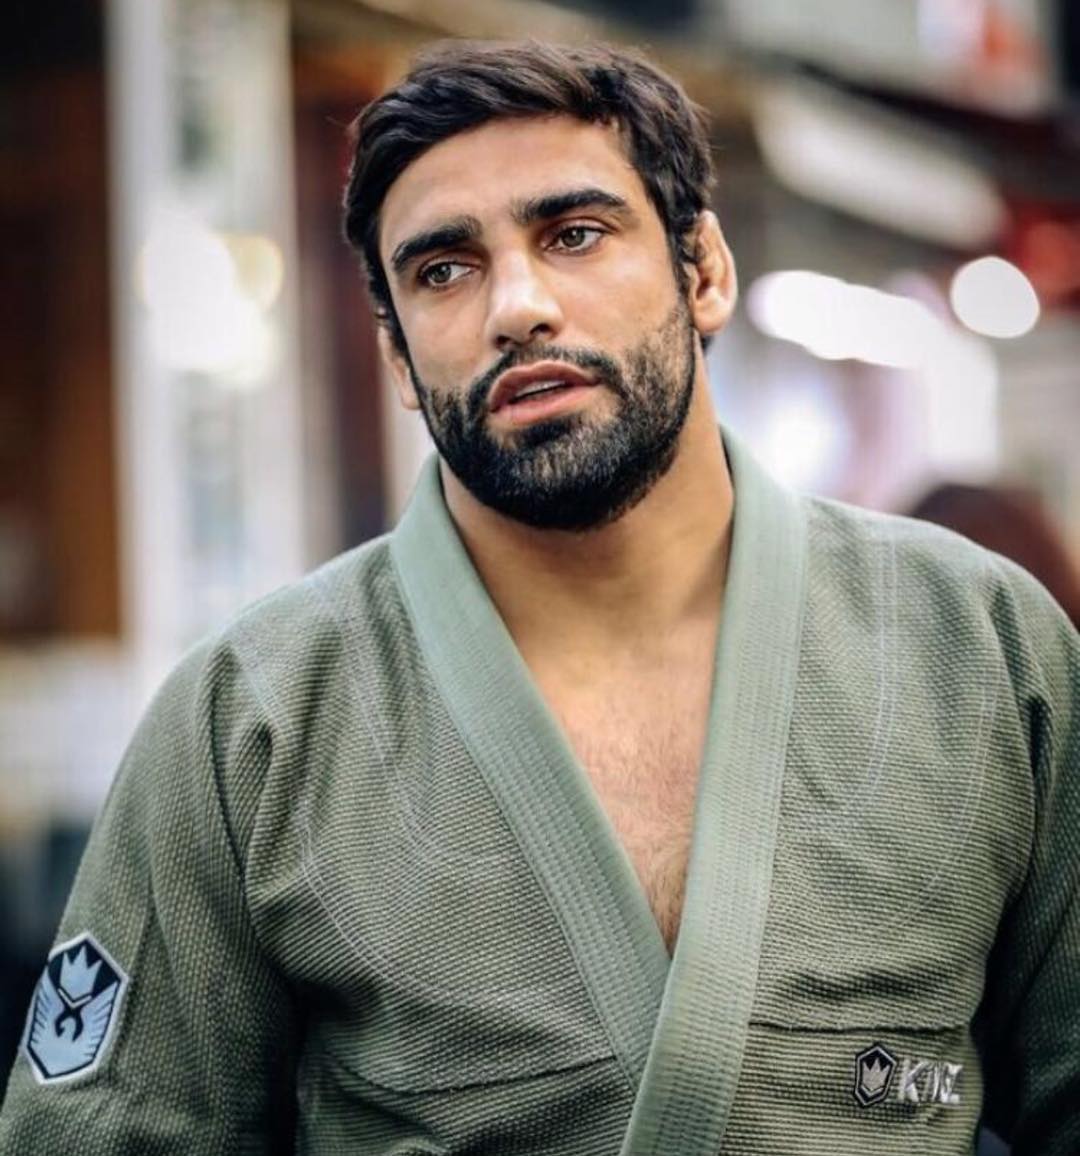 Leandro Lo   West Age, Height, Wife, Family – Biographyprofiles